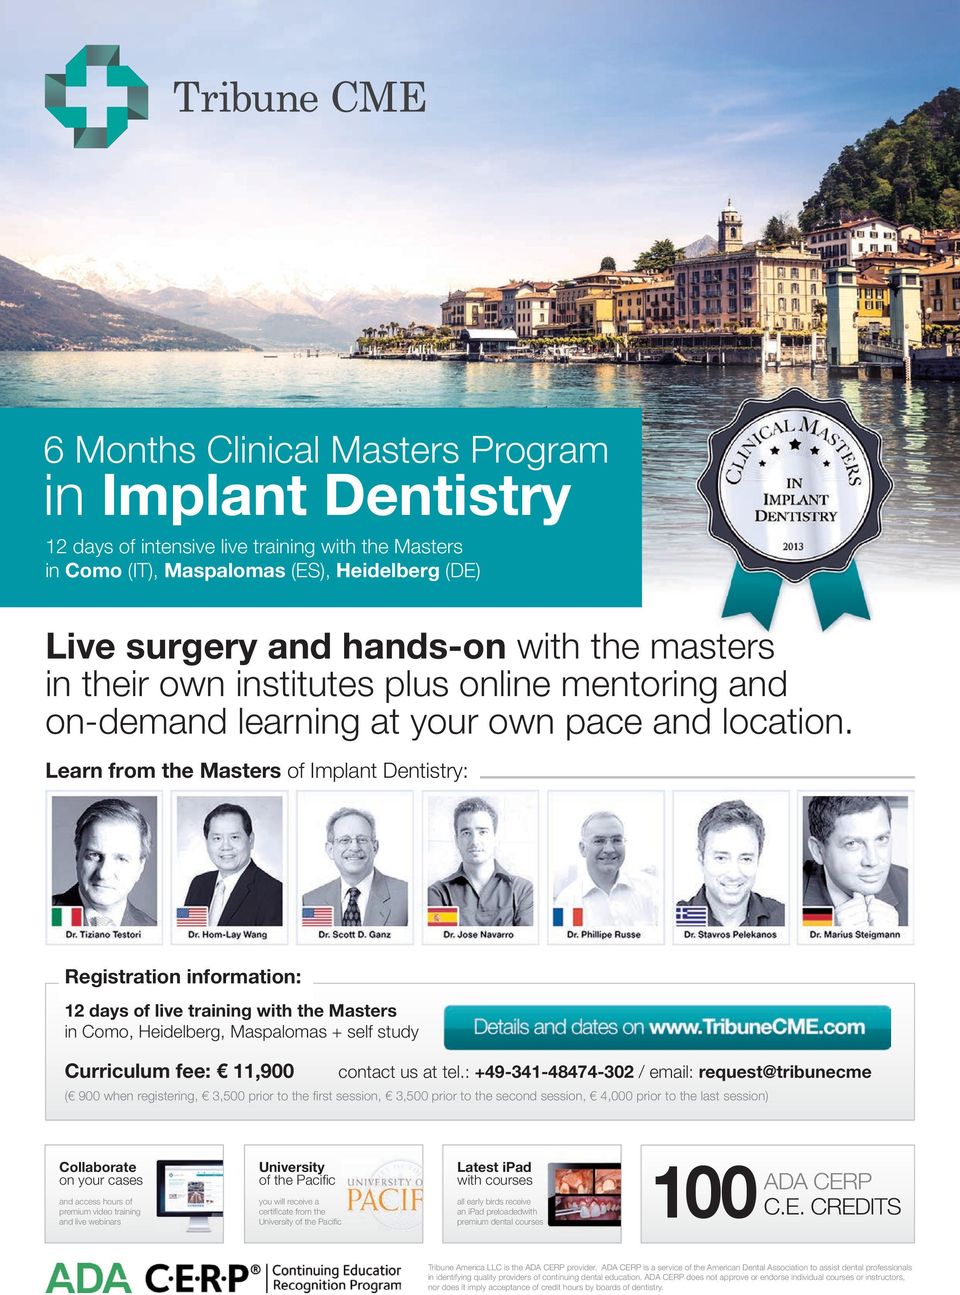 Learn from the Masters of Implant Dentistry: Registration information: 12 days of live training with the Masters in Como, Heidelberg, Maspalomas + self study Curriculum fee: 11,900 contact us at tel.